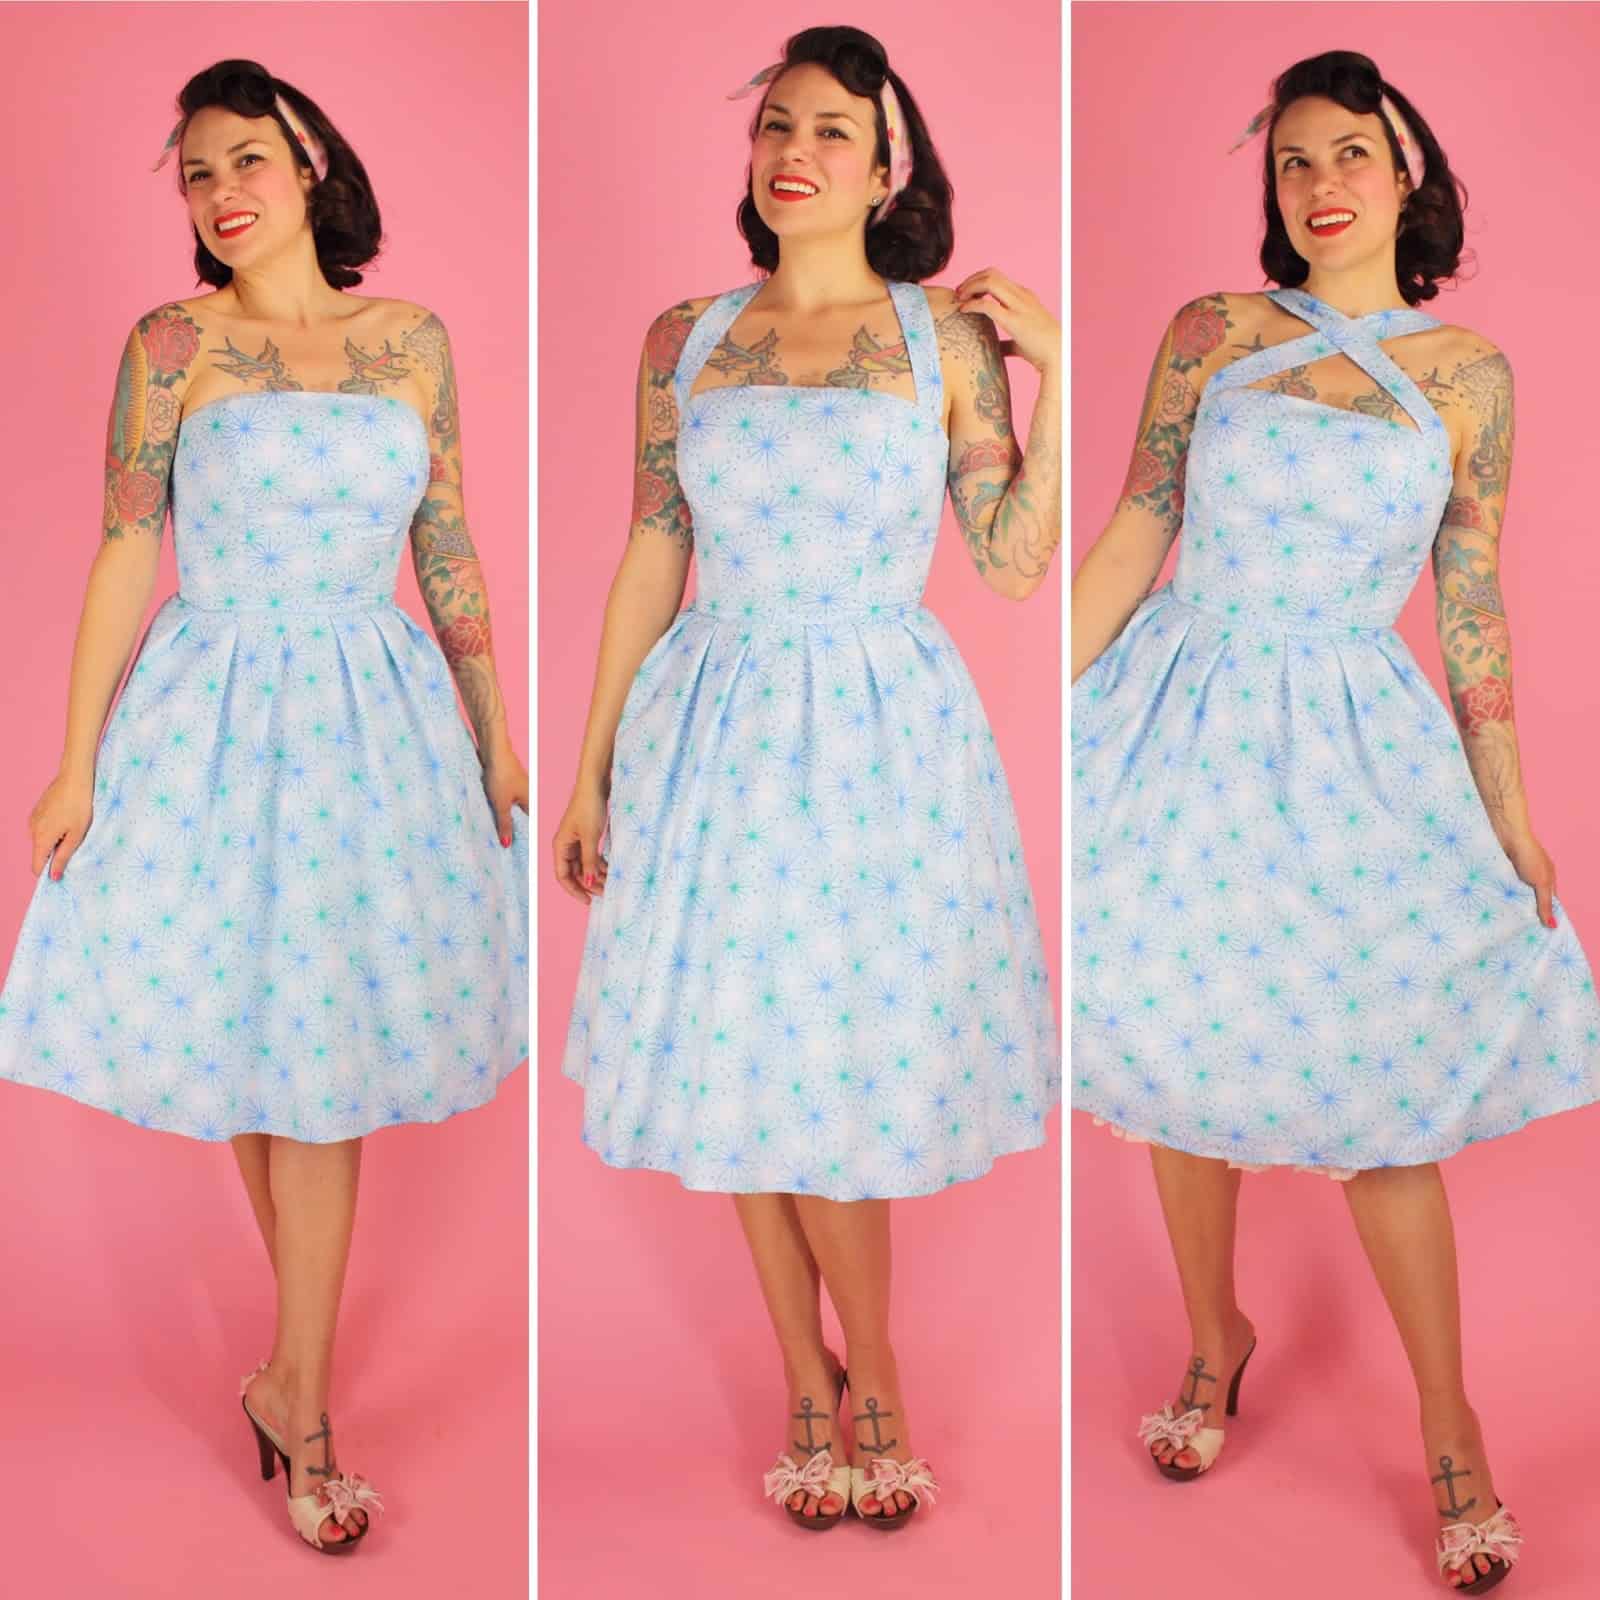 Simple adjustable pin up dress sewing pattern